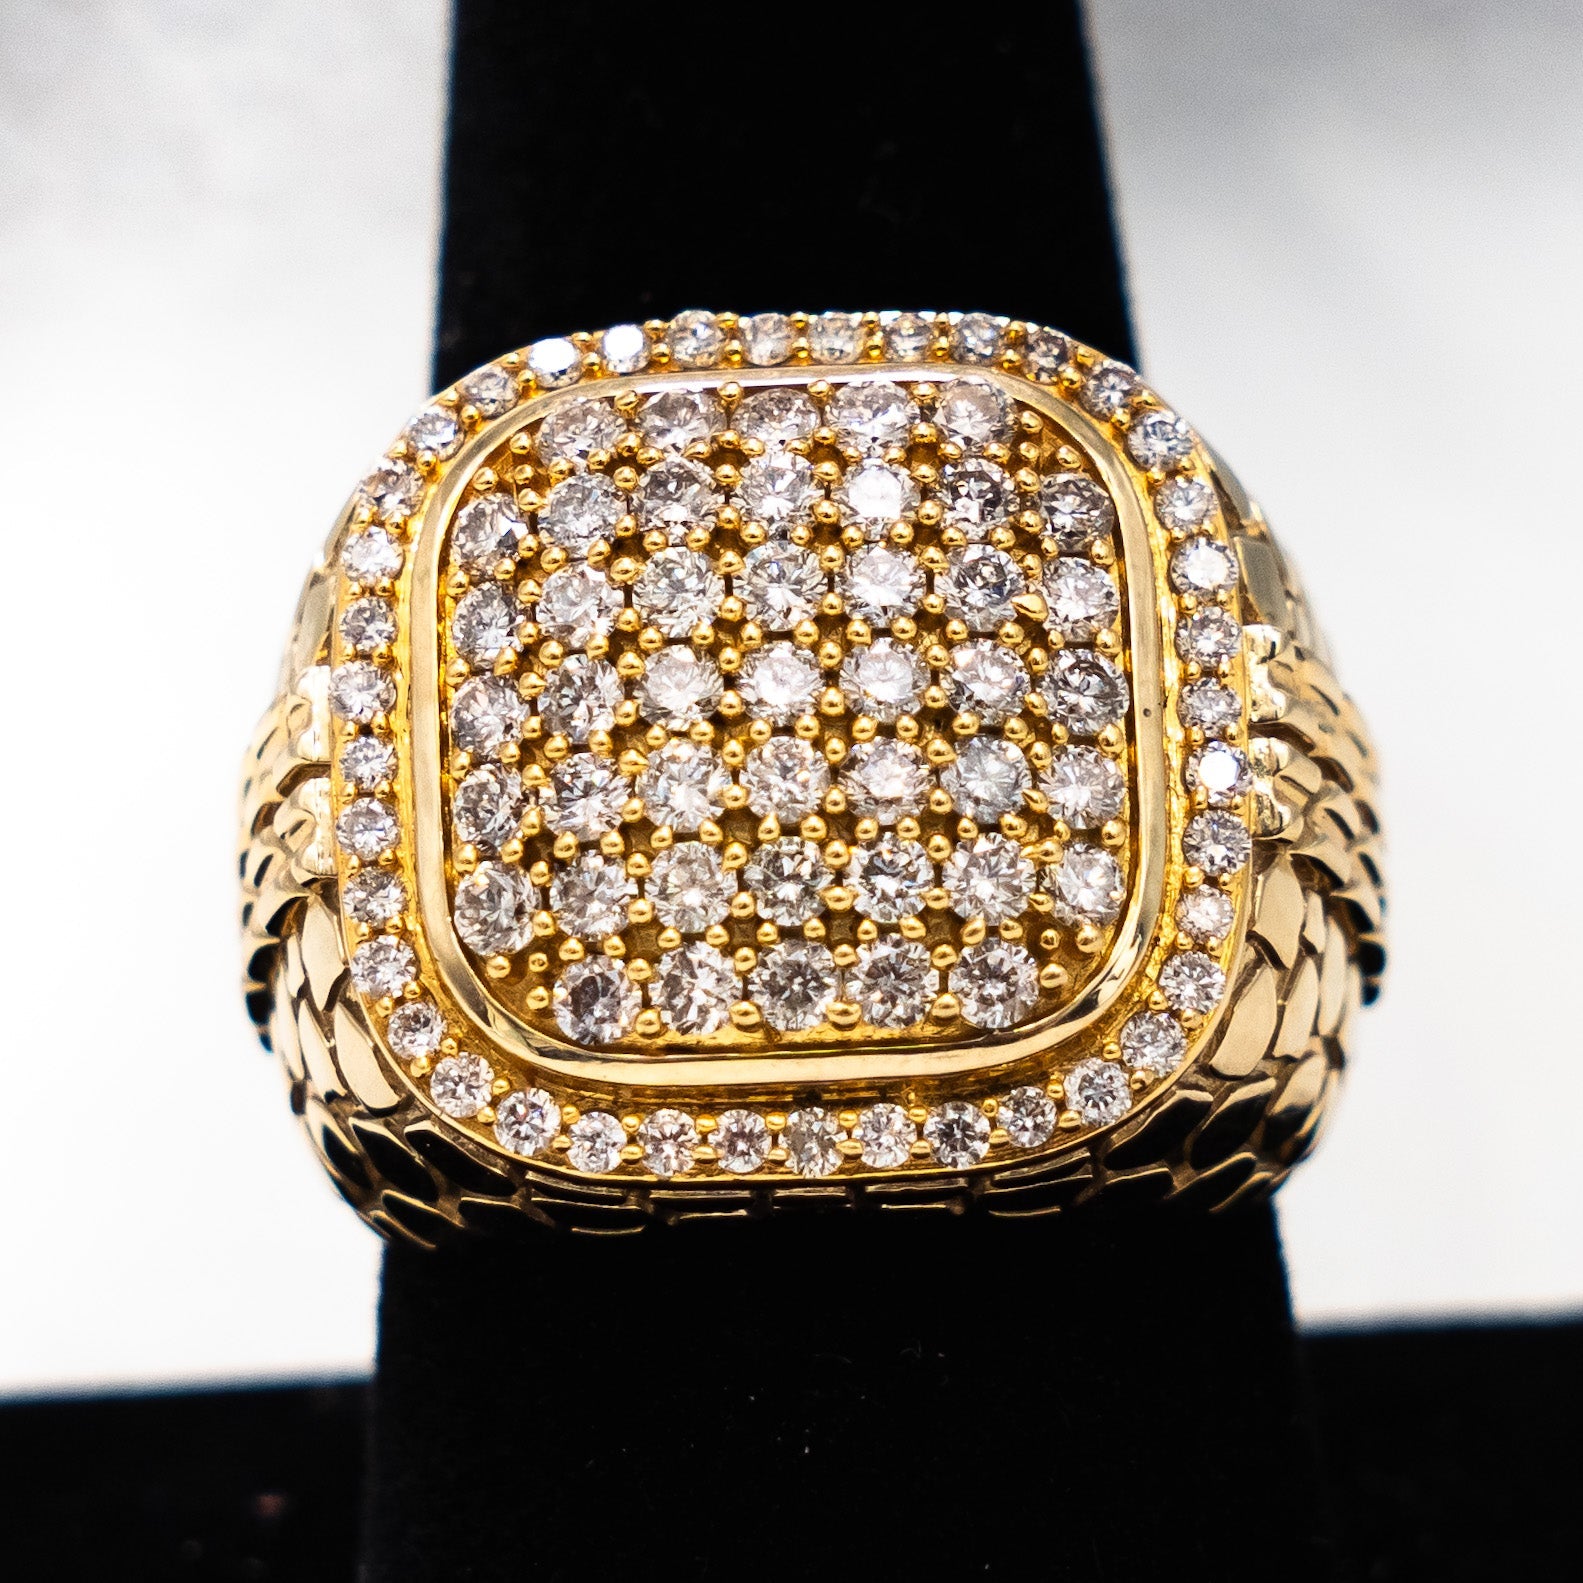 Square Ring 10K Yellow Gold With Diamonds 2,35ct / 14.3gr / Size 10